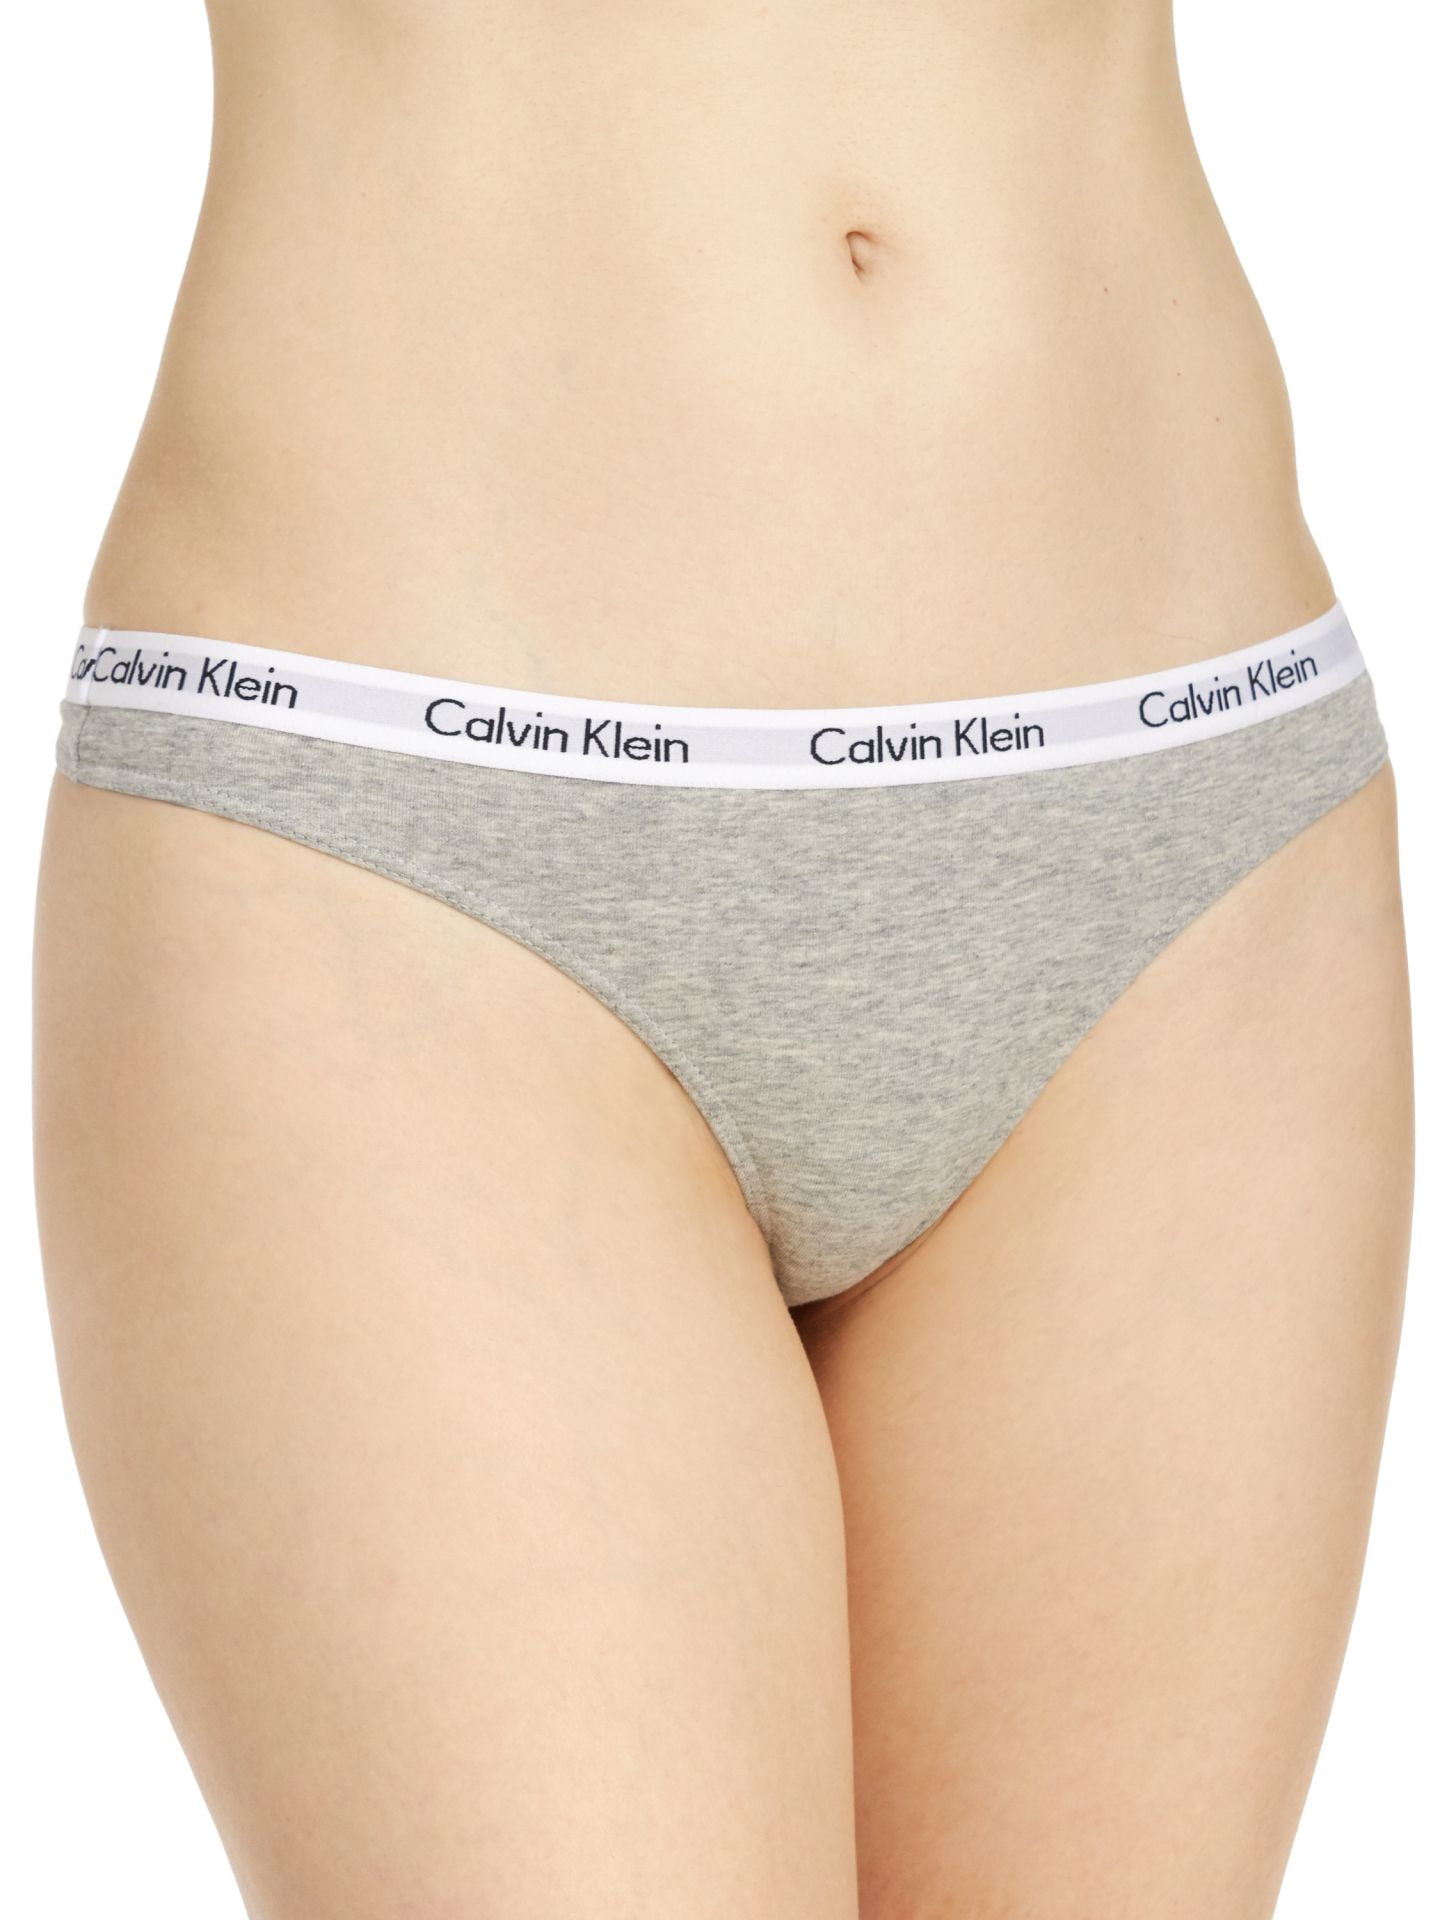 Calvin Klein Women's Carousel Thong 5-Pack - Black/Nymph's Thigh/Tawny  Port/Grey Heather/Confetti